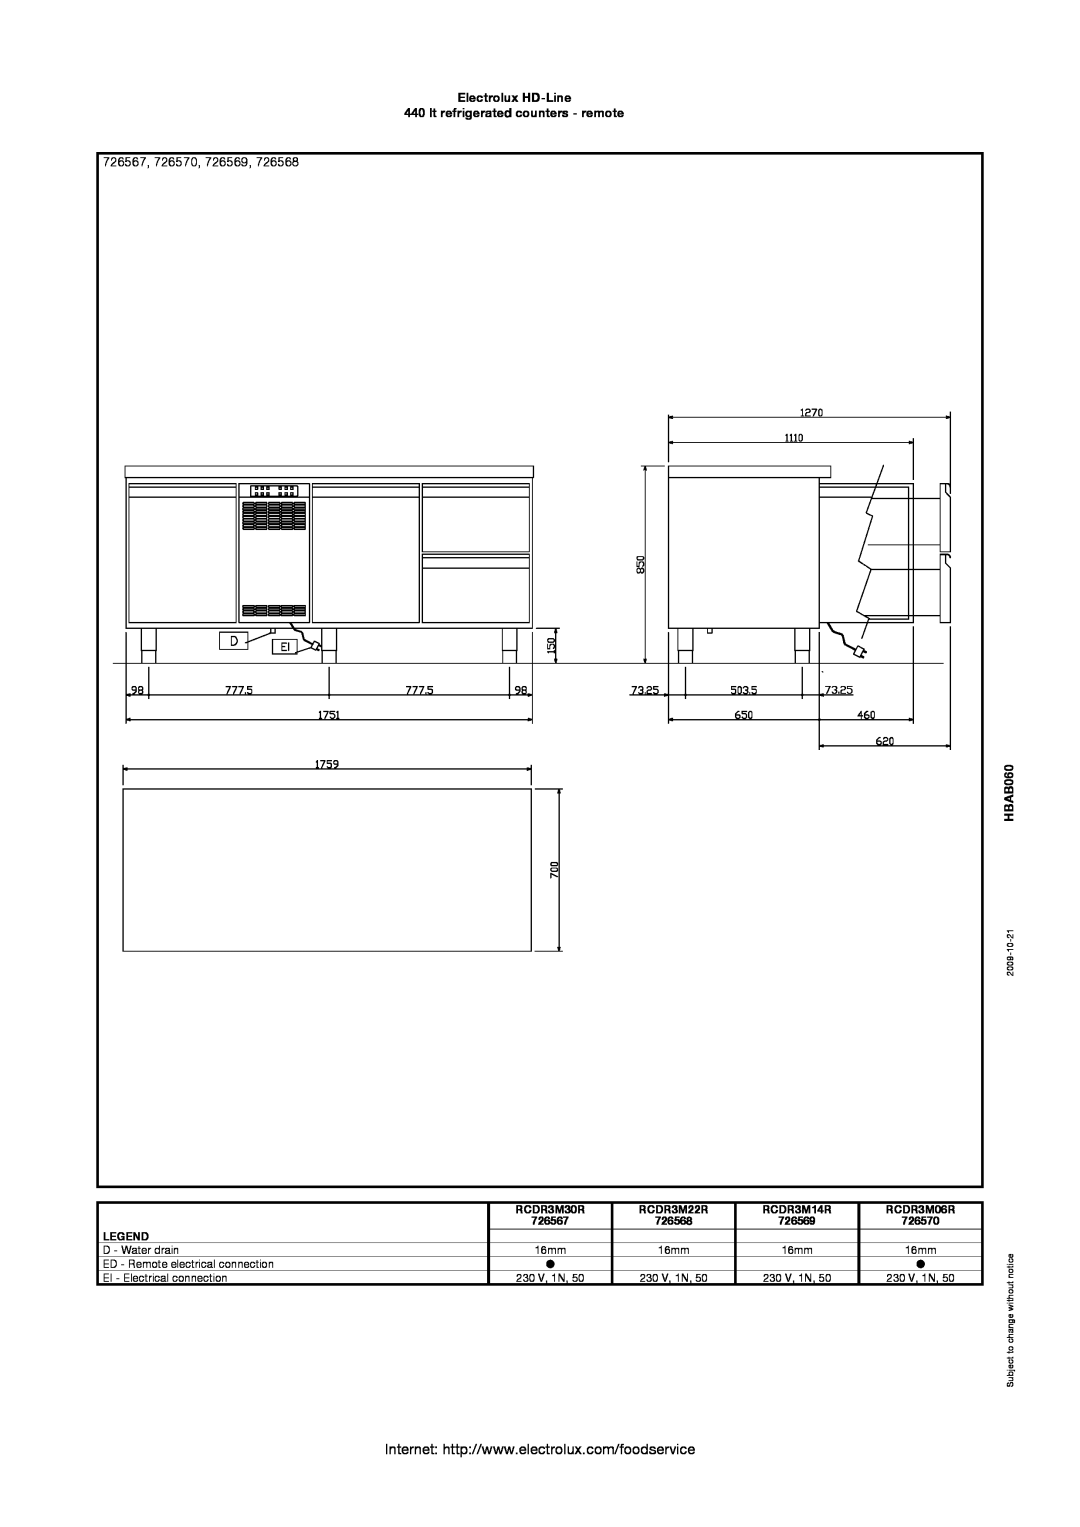 Electrolux manual 726567, 726570, 726569, Electrolux HD-Line 440 lt refrigerated counters - remote, HBAB060, 2009-10-21 